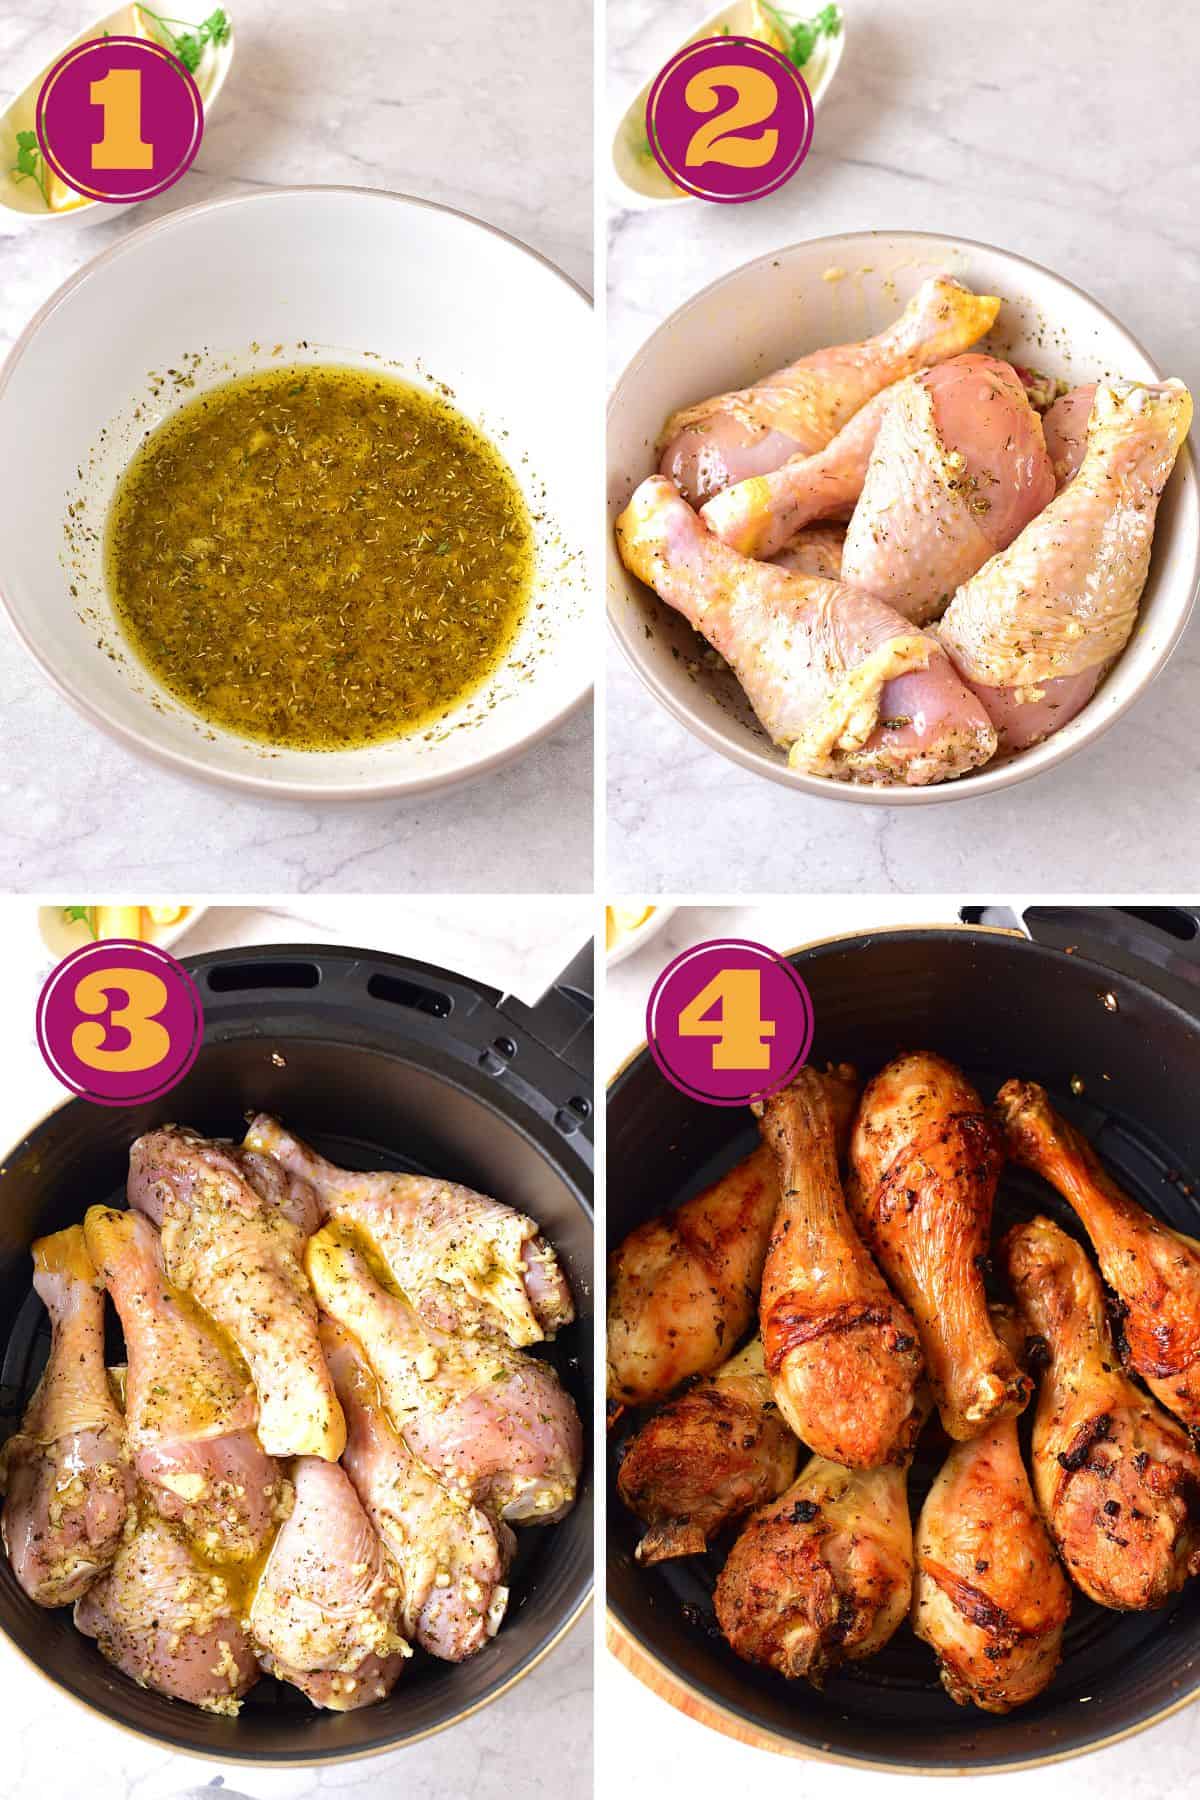 step-by-step instructions for how to make chicken leg marinade, and how to cook marinated chicken drumsticks until they are golden brown with crispy skin in an air fryer